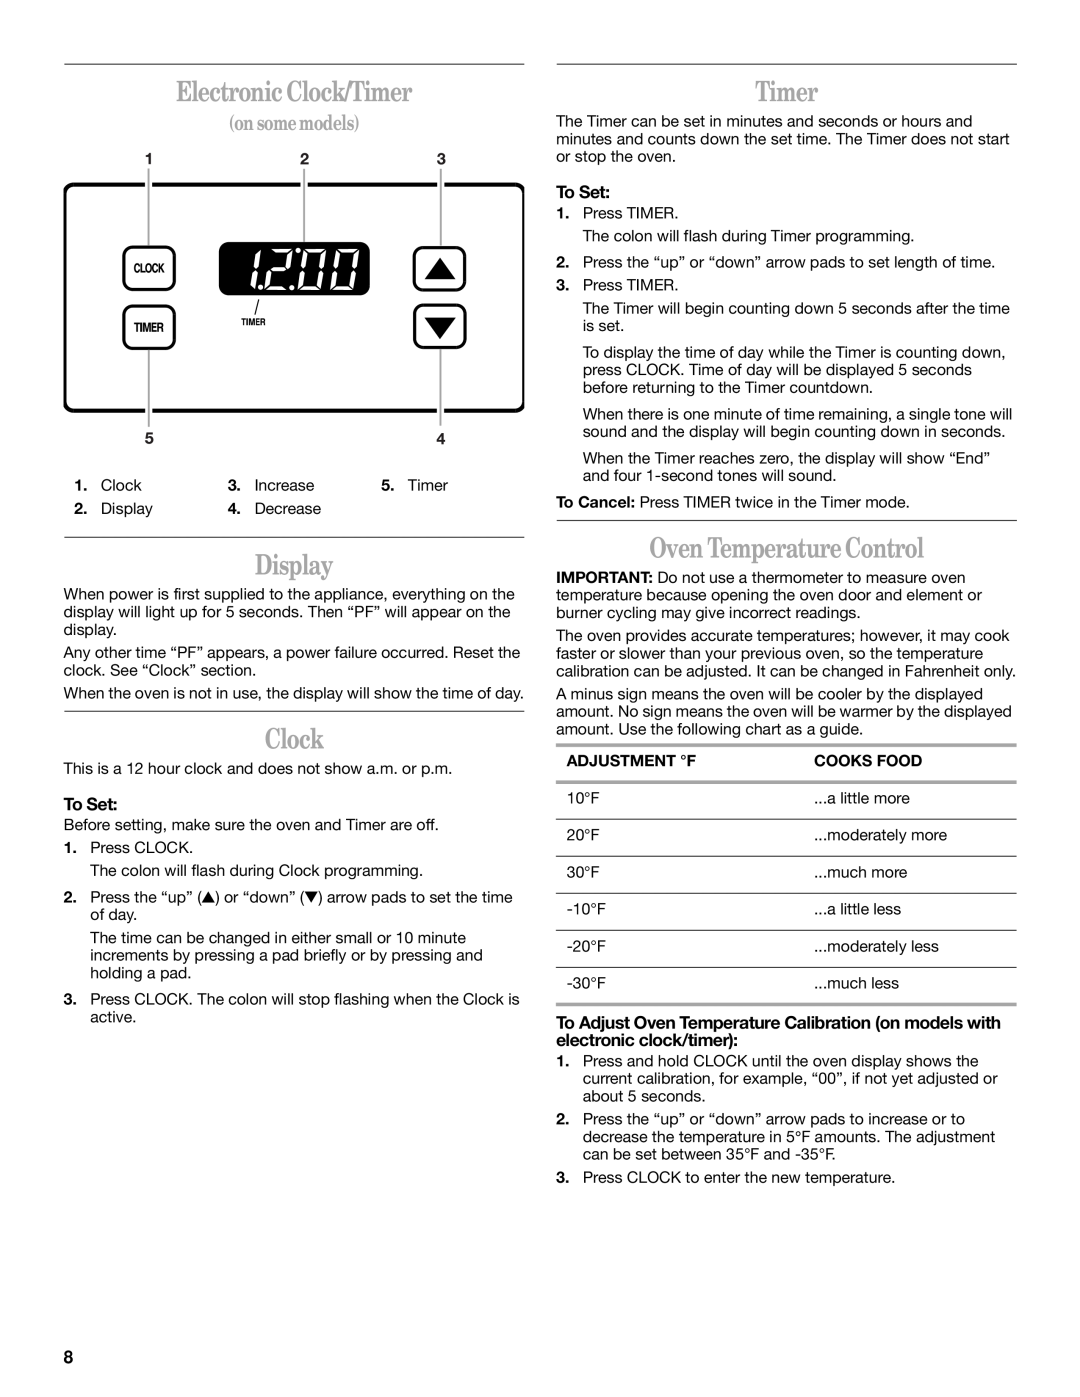 Whirlpool SF367LEH manual Electronic Clock/Timer, Display, Oven Temperature Control, on somemodels, To Set, Adjustment F 